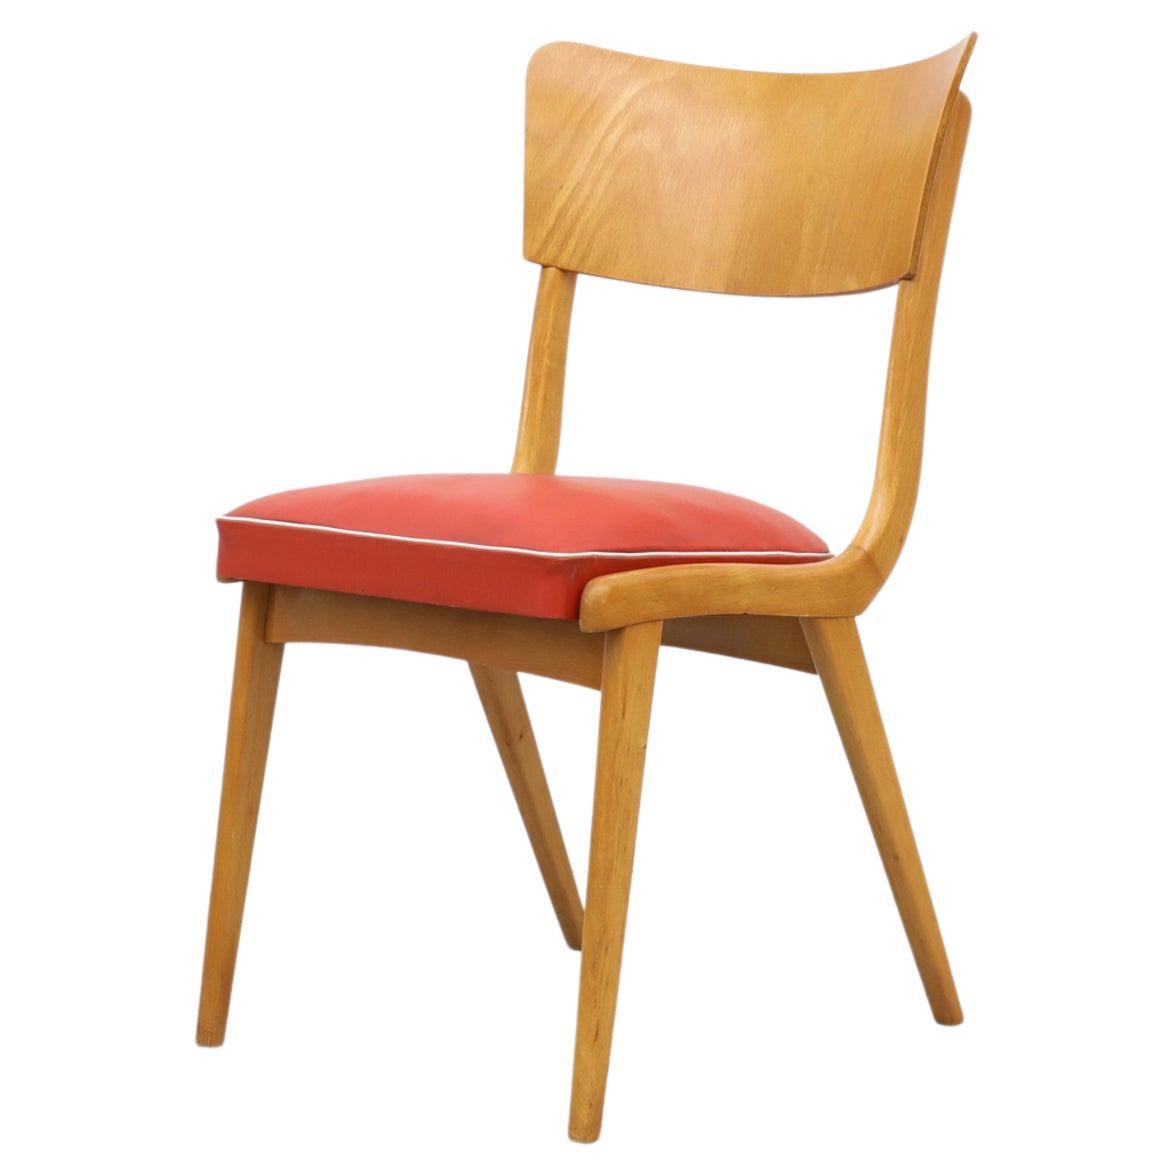 Midcentury Chair with Red Vinyl Seat